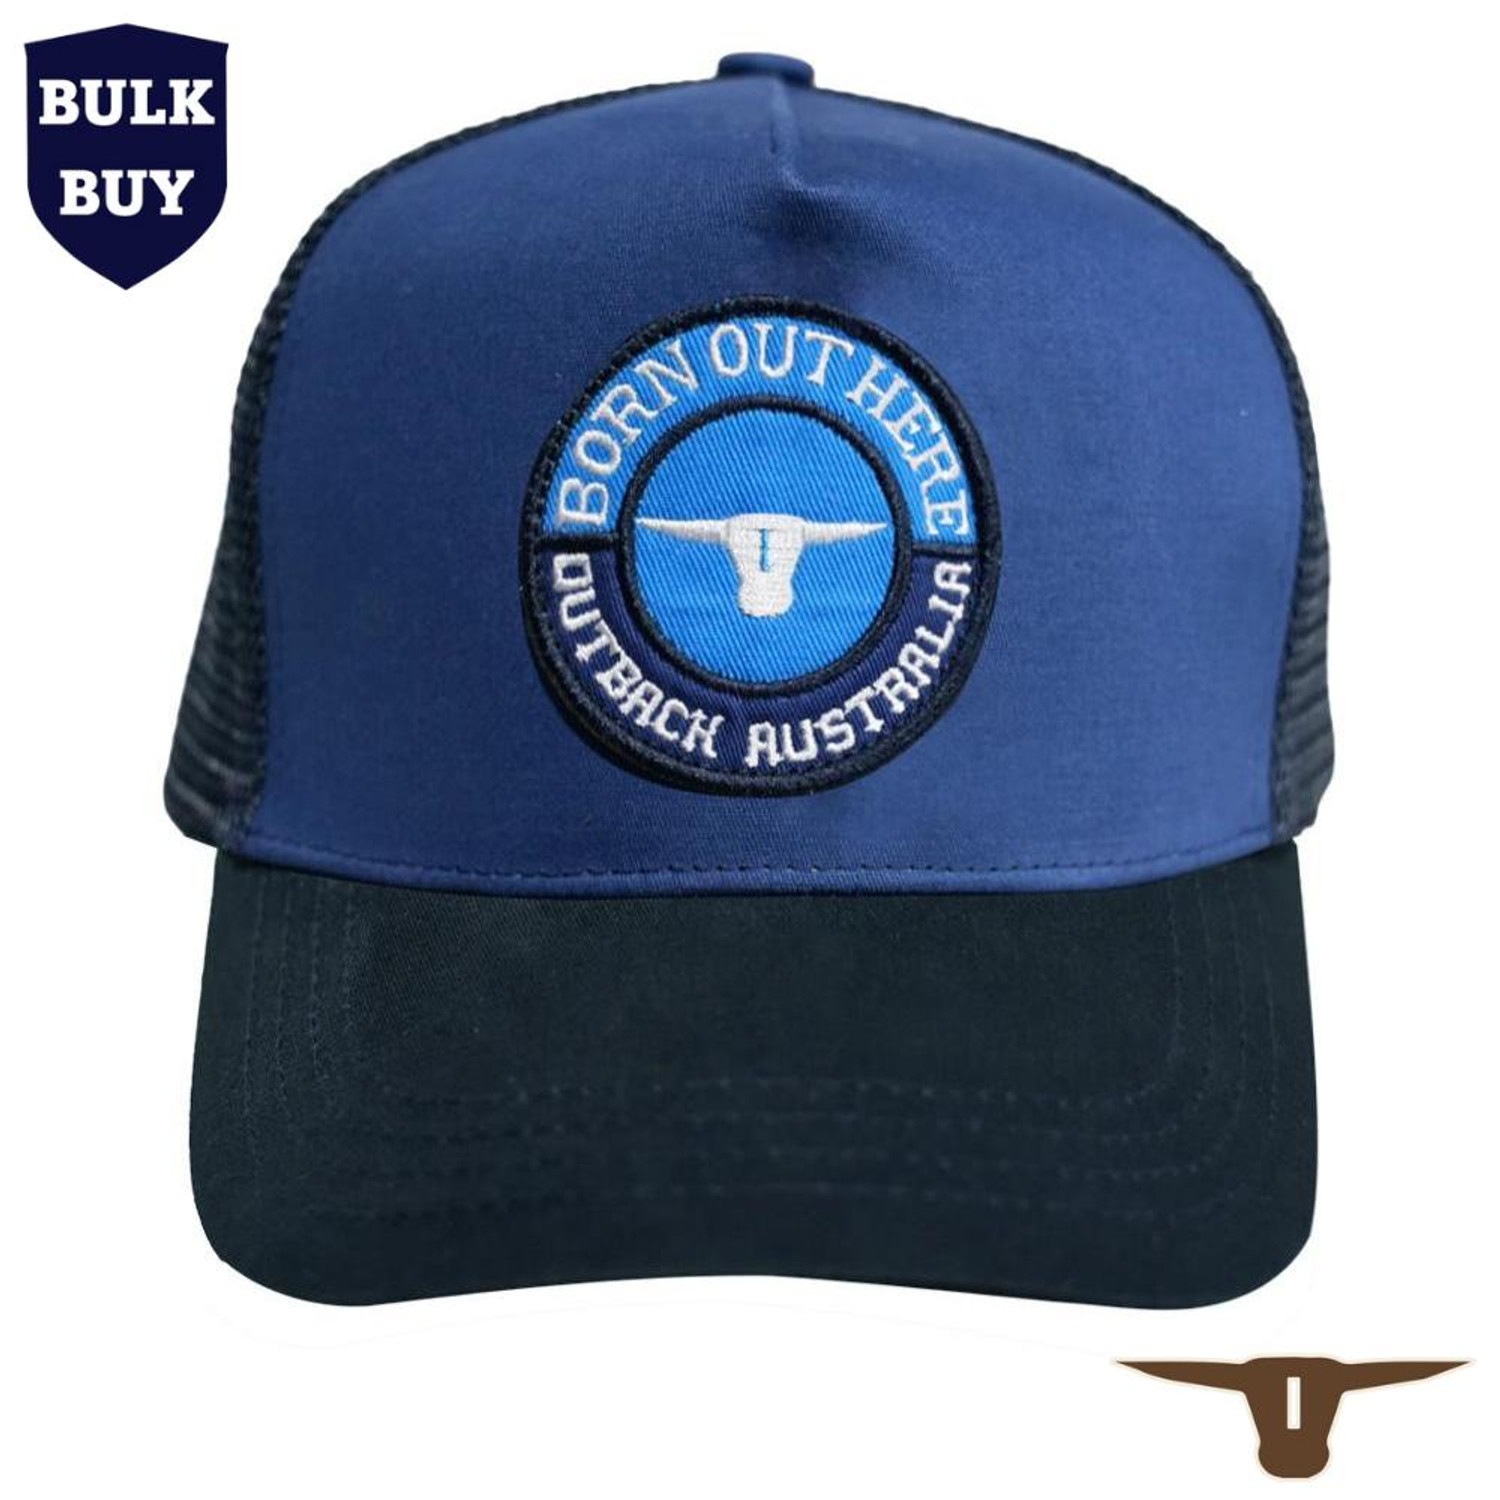  Born Out Here Trucker Cap in Blueberry BTC8021 